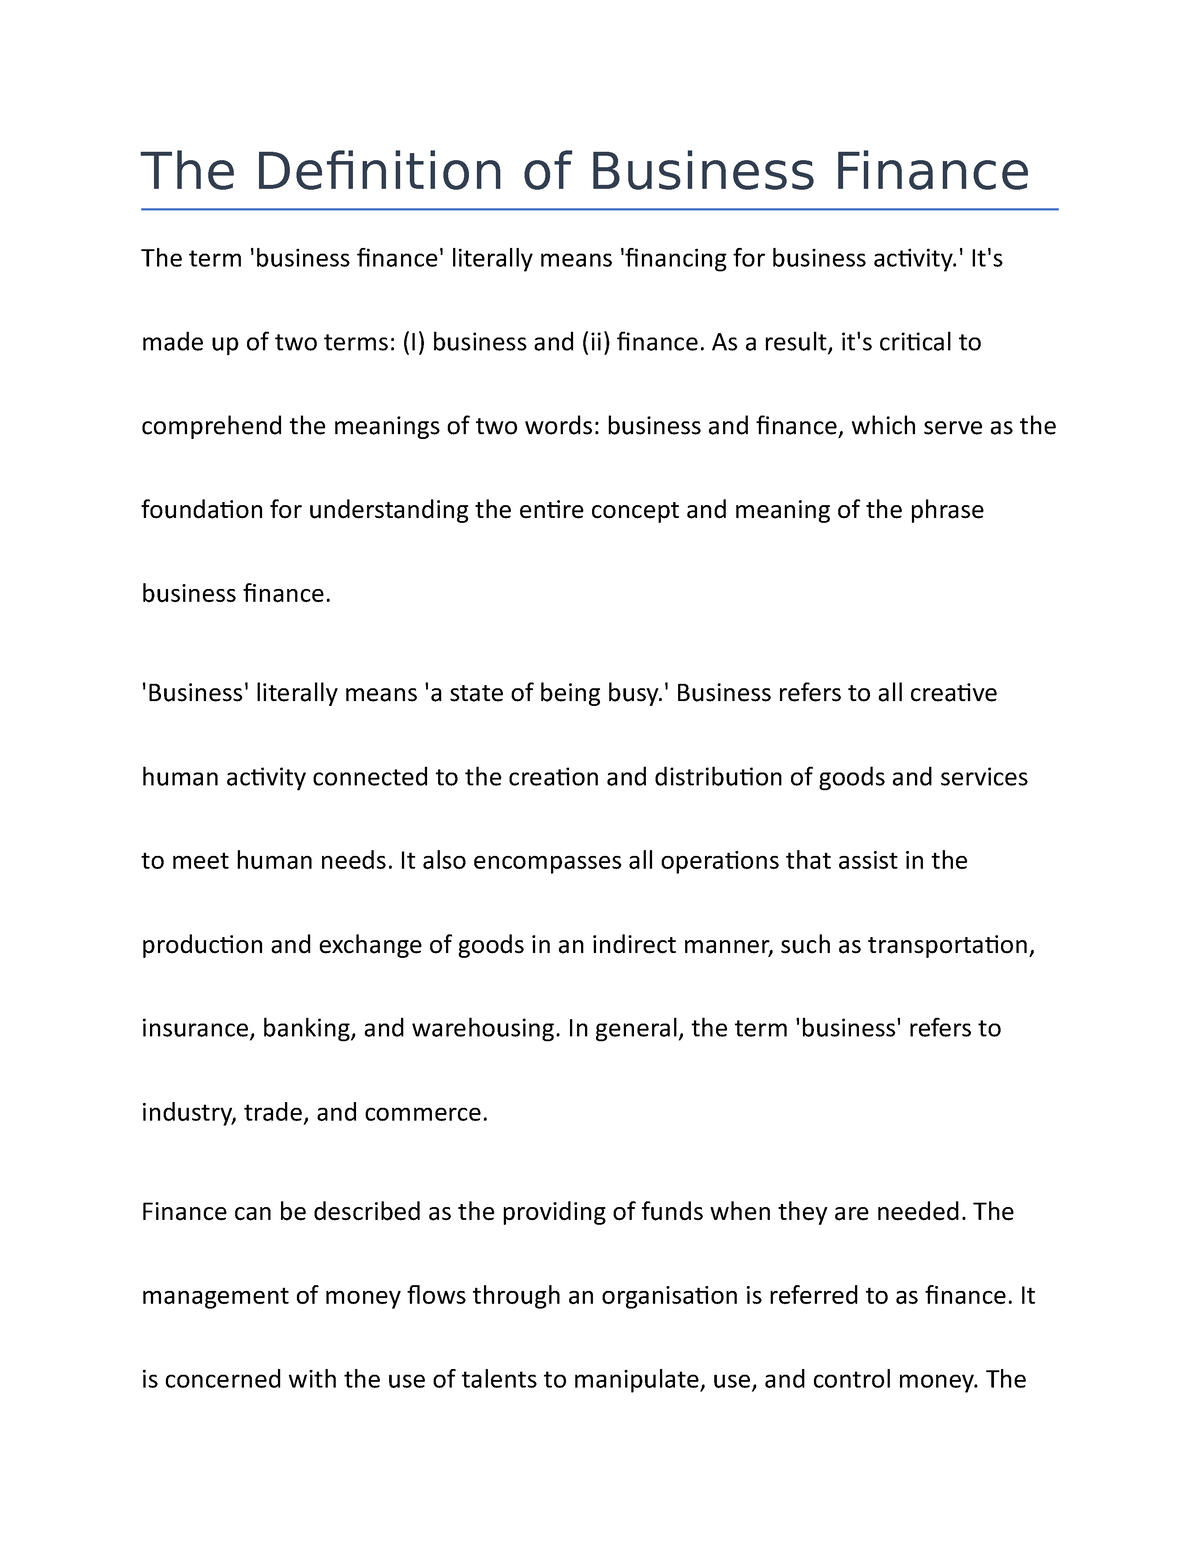 the-definition-of-business-finance-it-s-made-up-of-two-terms-i